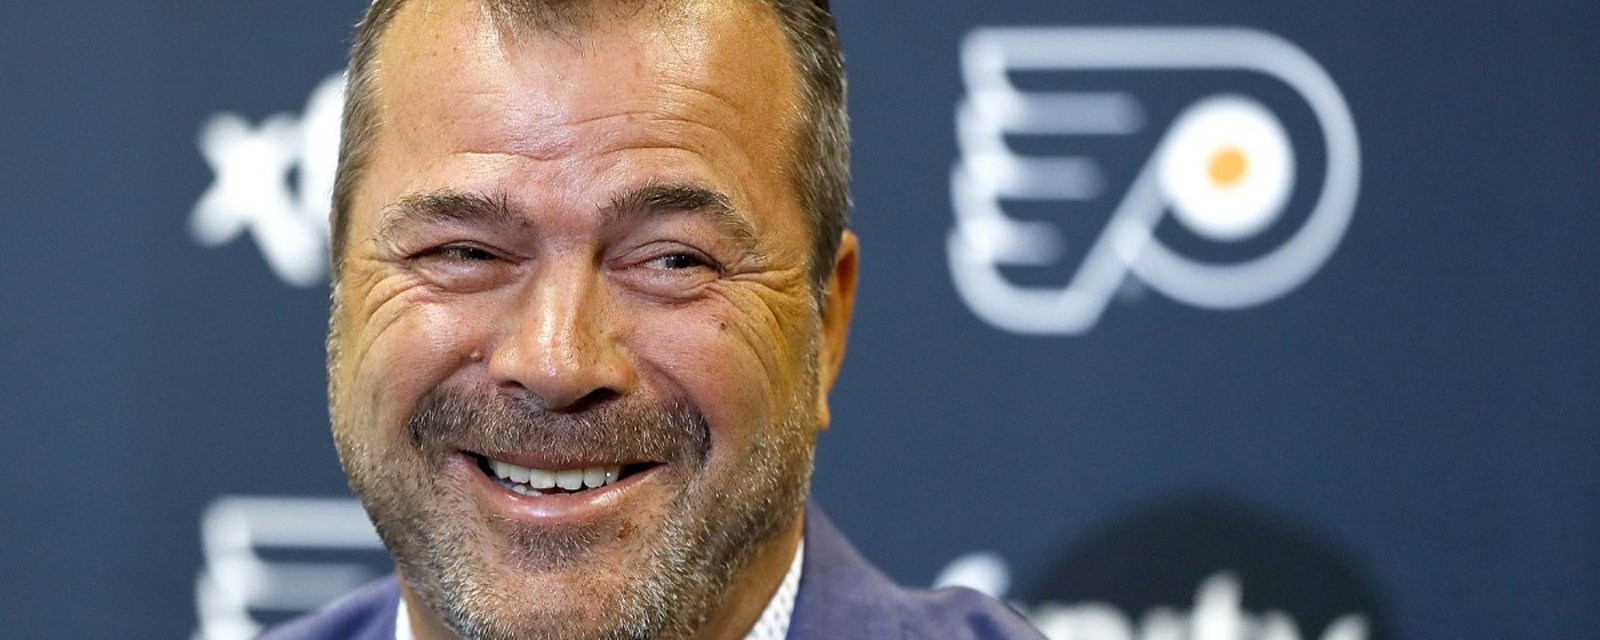 Rumor: Alain Vigneault appears to have benched the Flyers leading goal scorer.